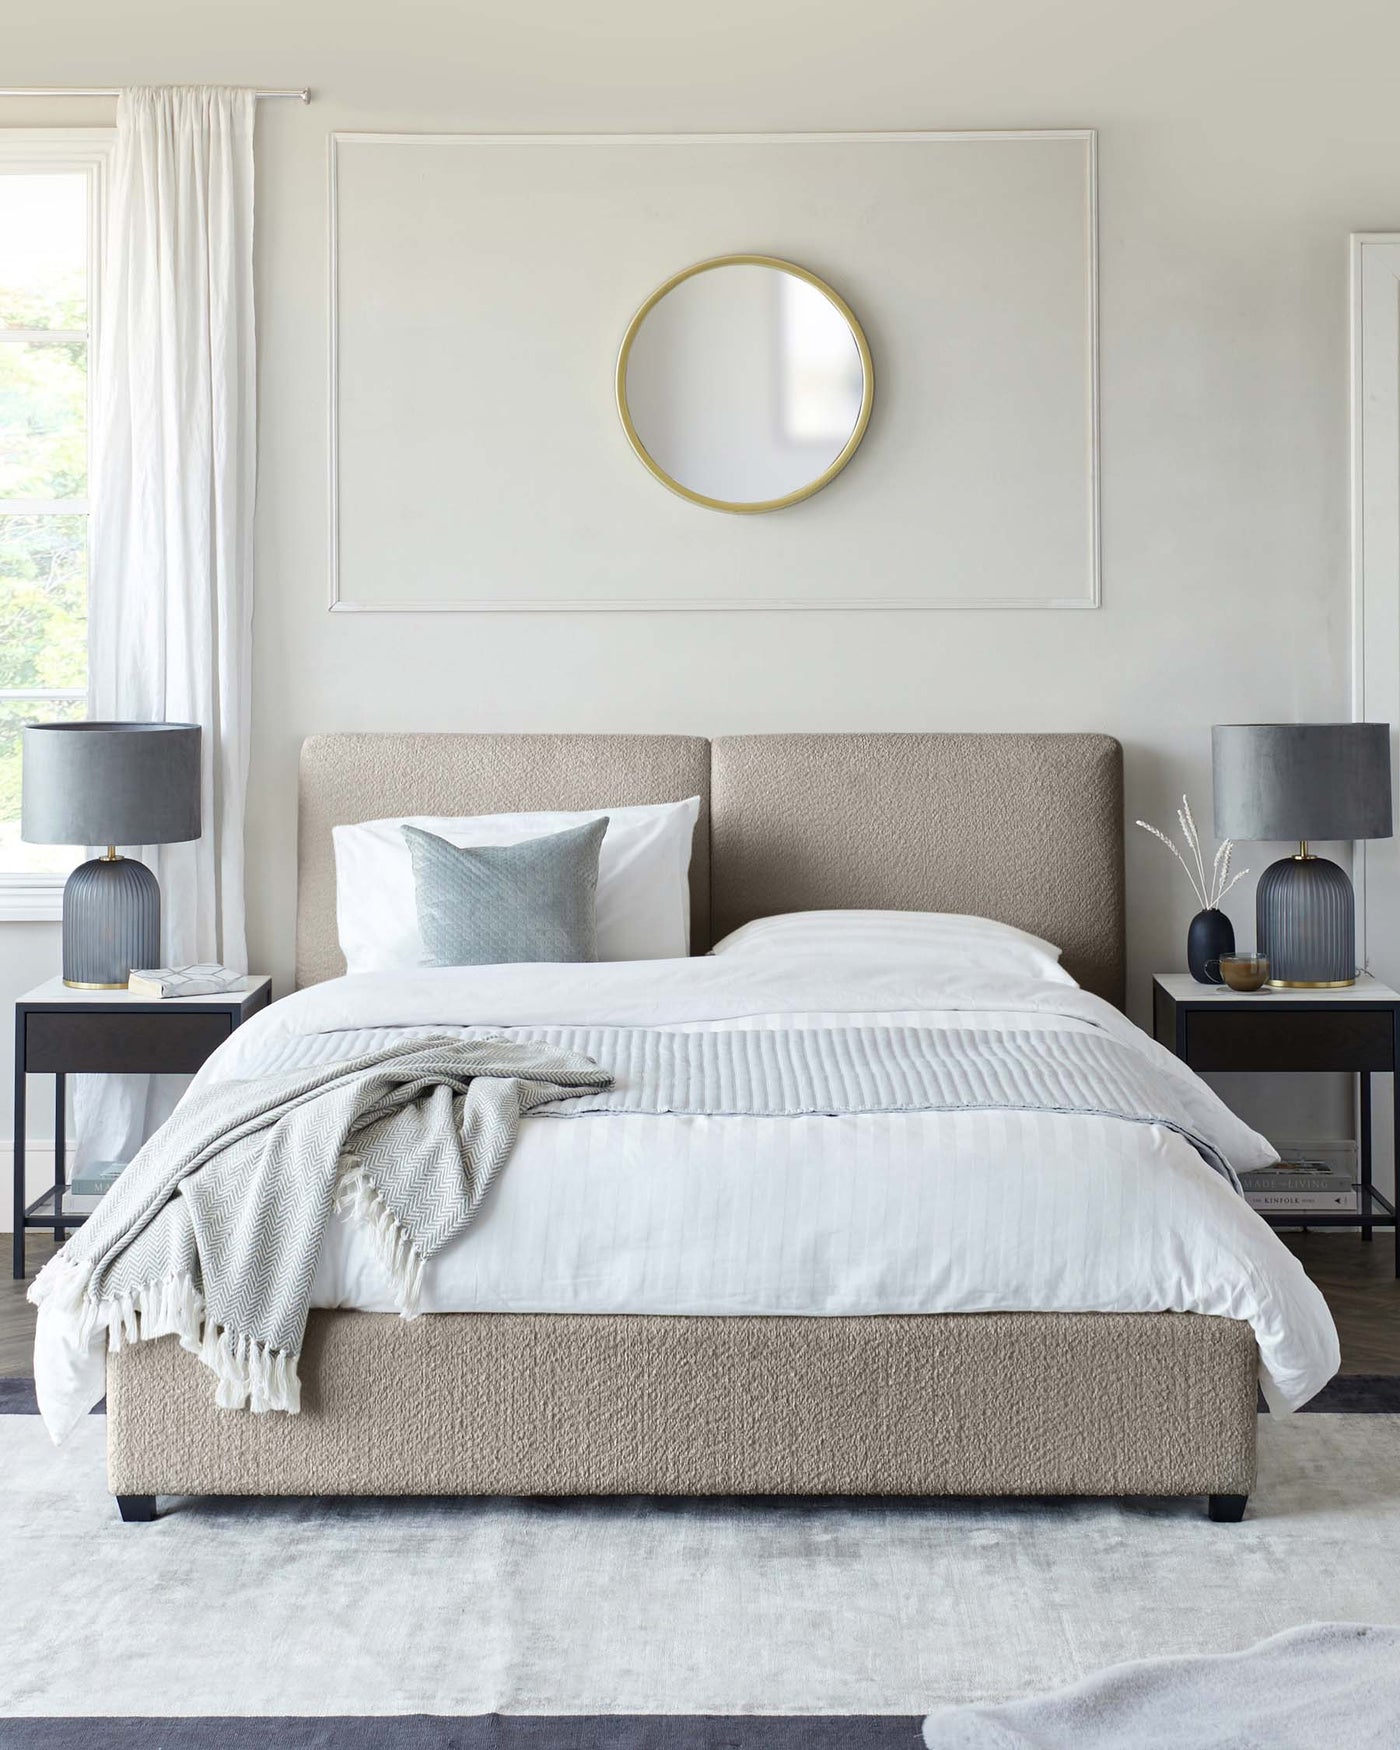 Elegant modern bedroom featuring a lightly textured tan upholstered platform bed with a simple headboard, crisp white bedding, and a soft grey throw blanket. Flanking the bed are two matching black bedside tables with round golden knob detailing, each supporting a texturally ribbed black table lamp. A minimalist round gold-trimmed mirror punctuates the wall above the bed, and the room is anchored by a large light grey area rug, creating a serene and sophisticated ambiance.